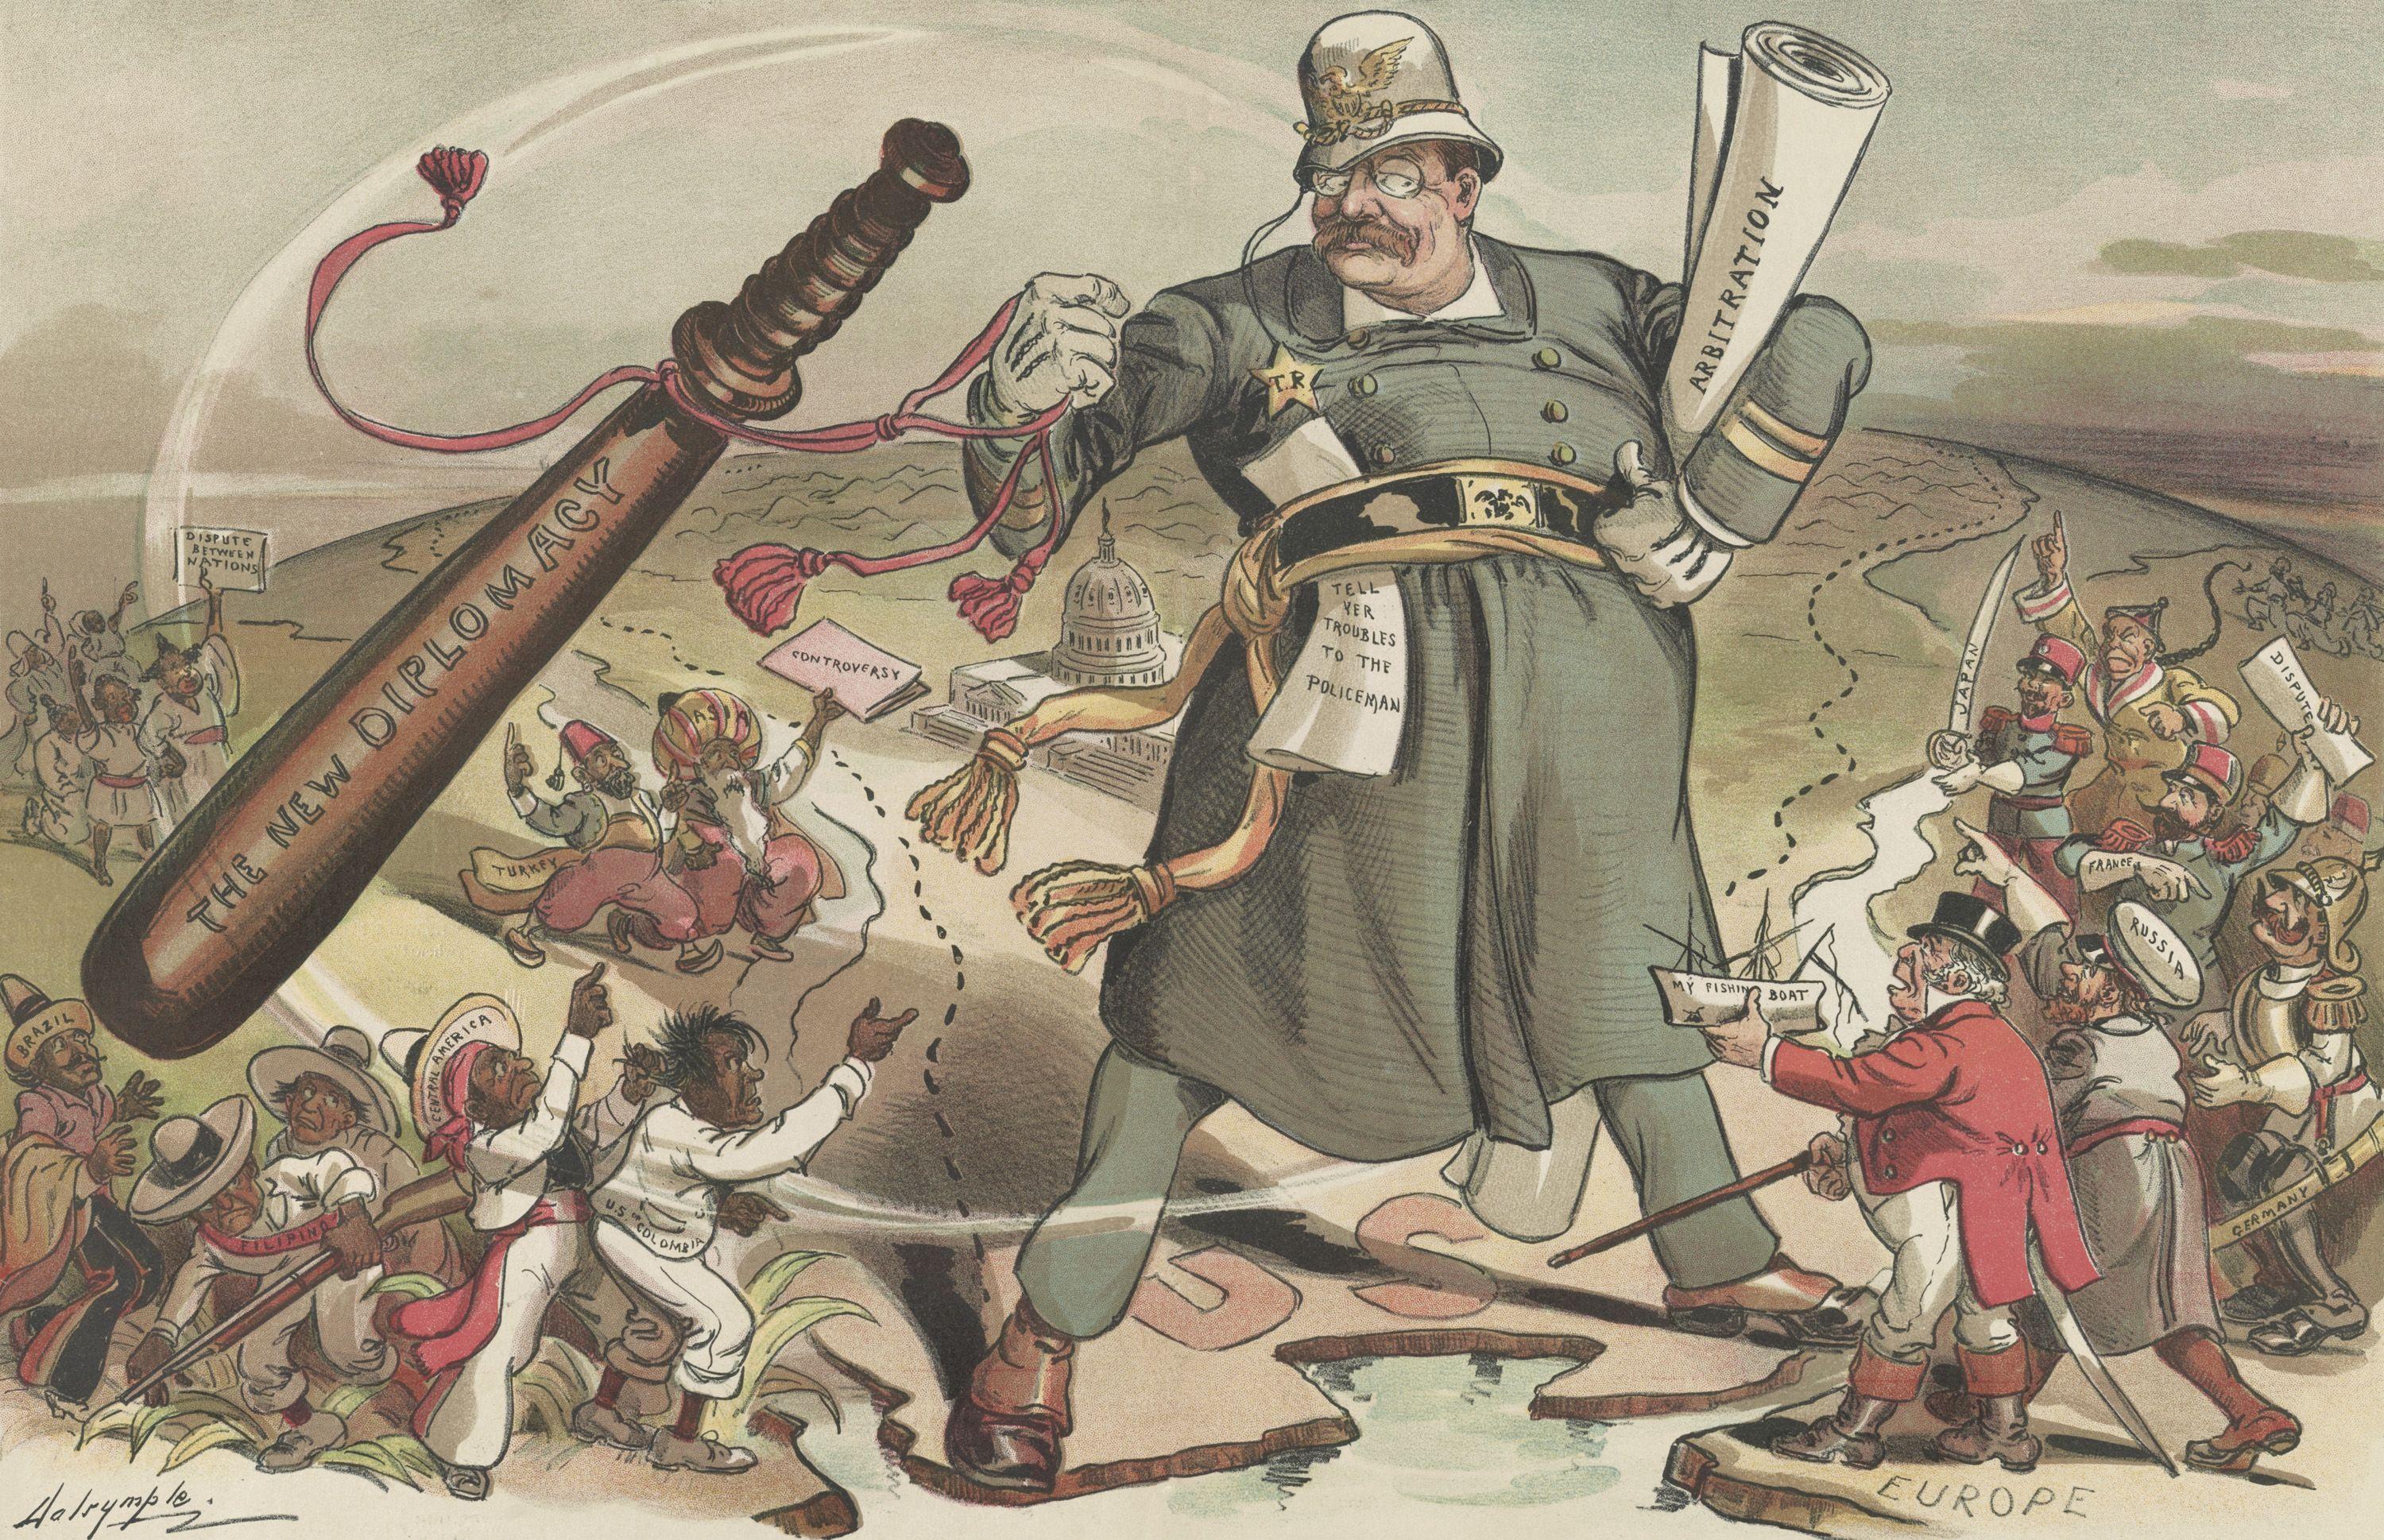 THE WORLDS CONSTABLE, PUCK Magazine cartoon of Jan. 14, 1905. President Theodore Roosevelt is a constable standing between Europe, Latin America, Asia, and Africa with a Big Stick labeled The New Dipl